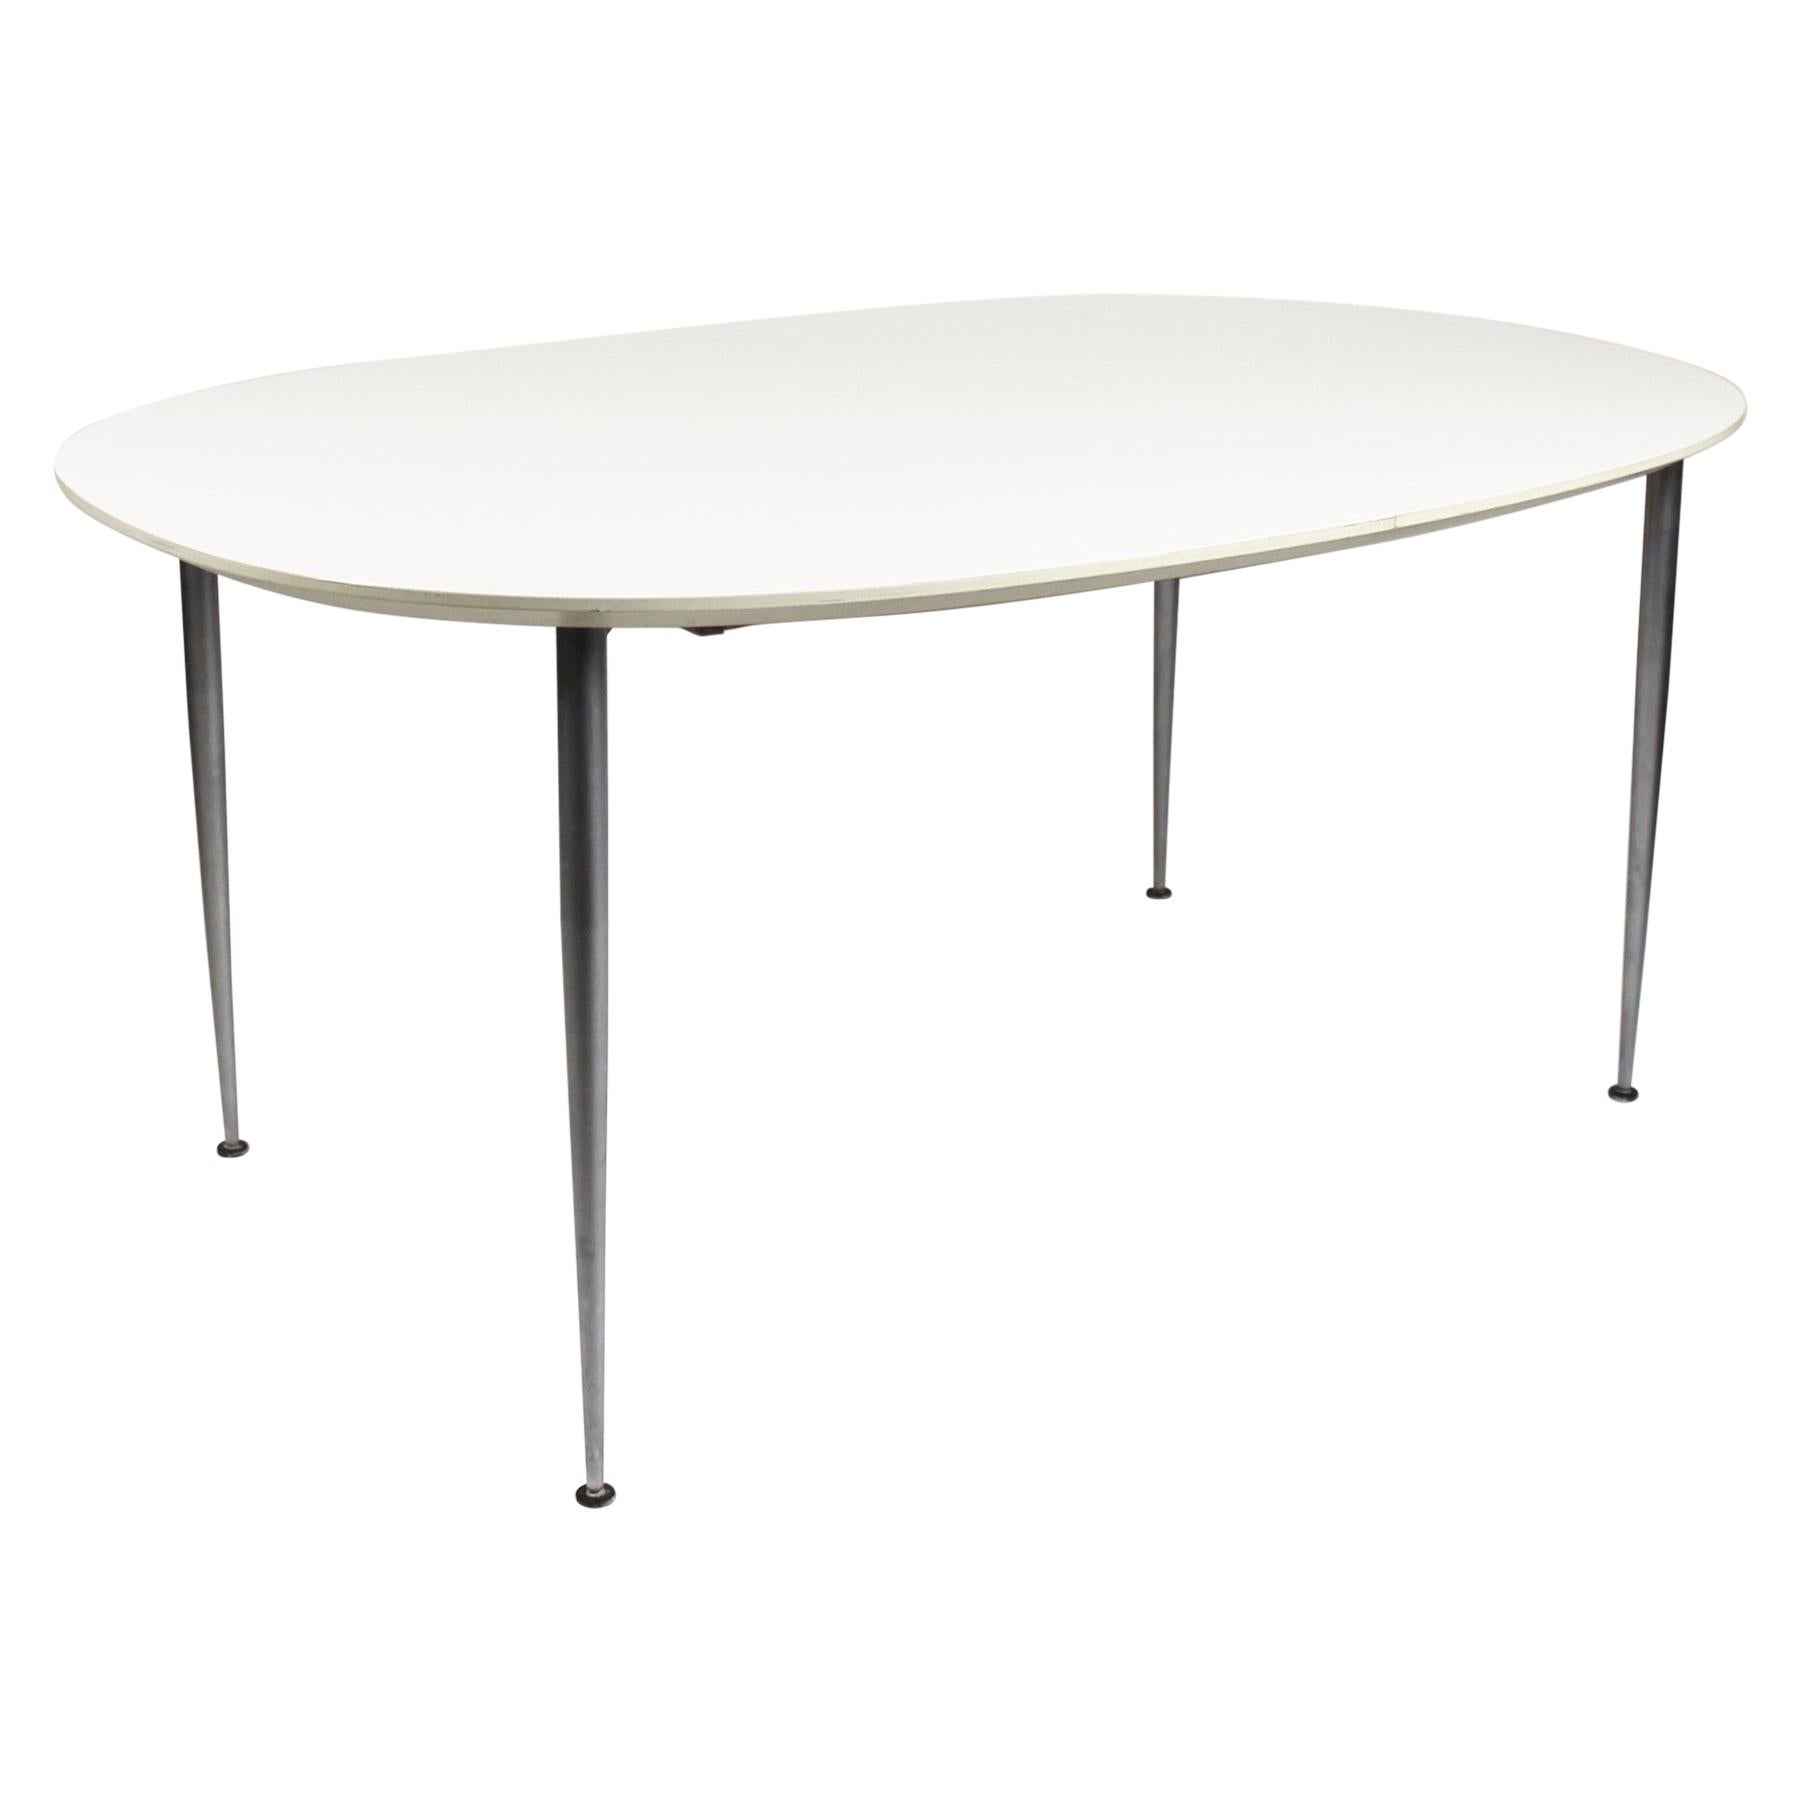 Dining Table with White Laminate and Steel Legs of Danish Design